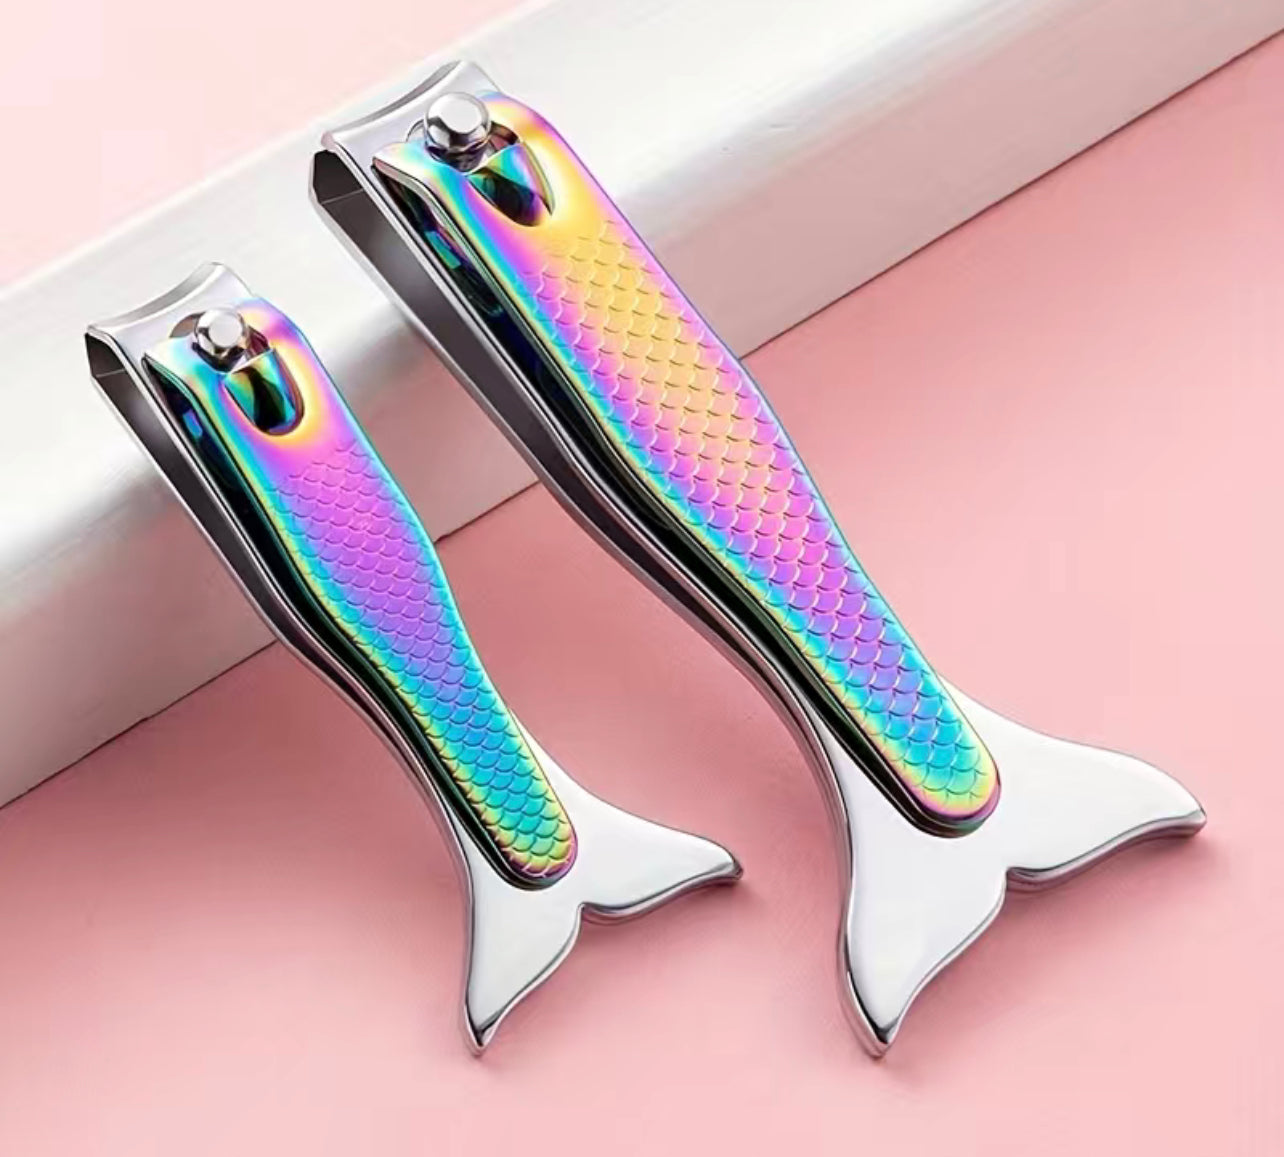 Mermaid Nail Clippers Stainless Steel Cuticle Remover Trimmer Scissor Manicure Pedicure Fingernail Nipper Tool Two Sizes